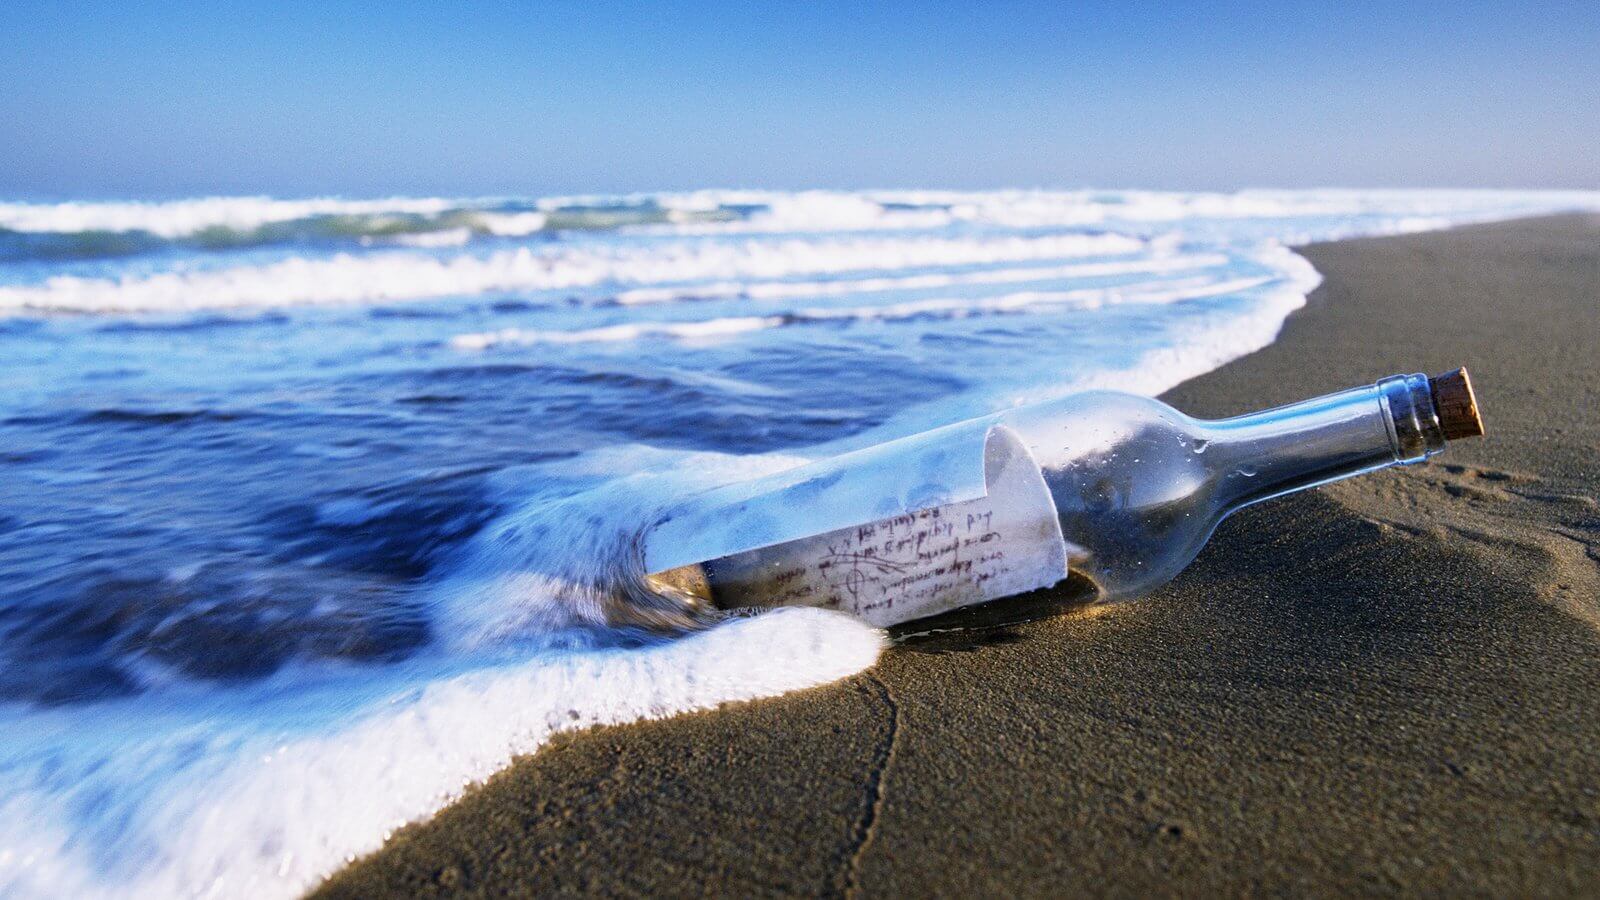 How much can float a message in a bottle if to throw it into the ocean?